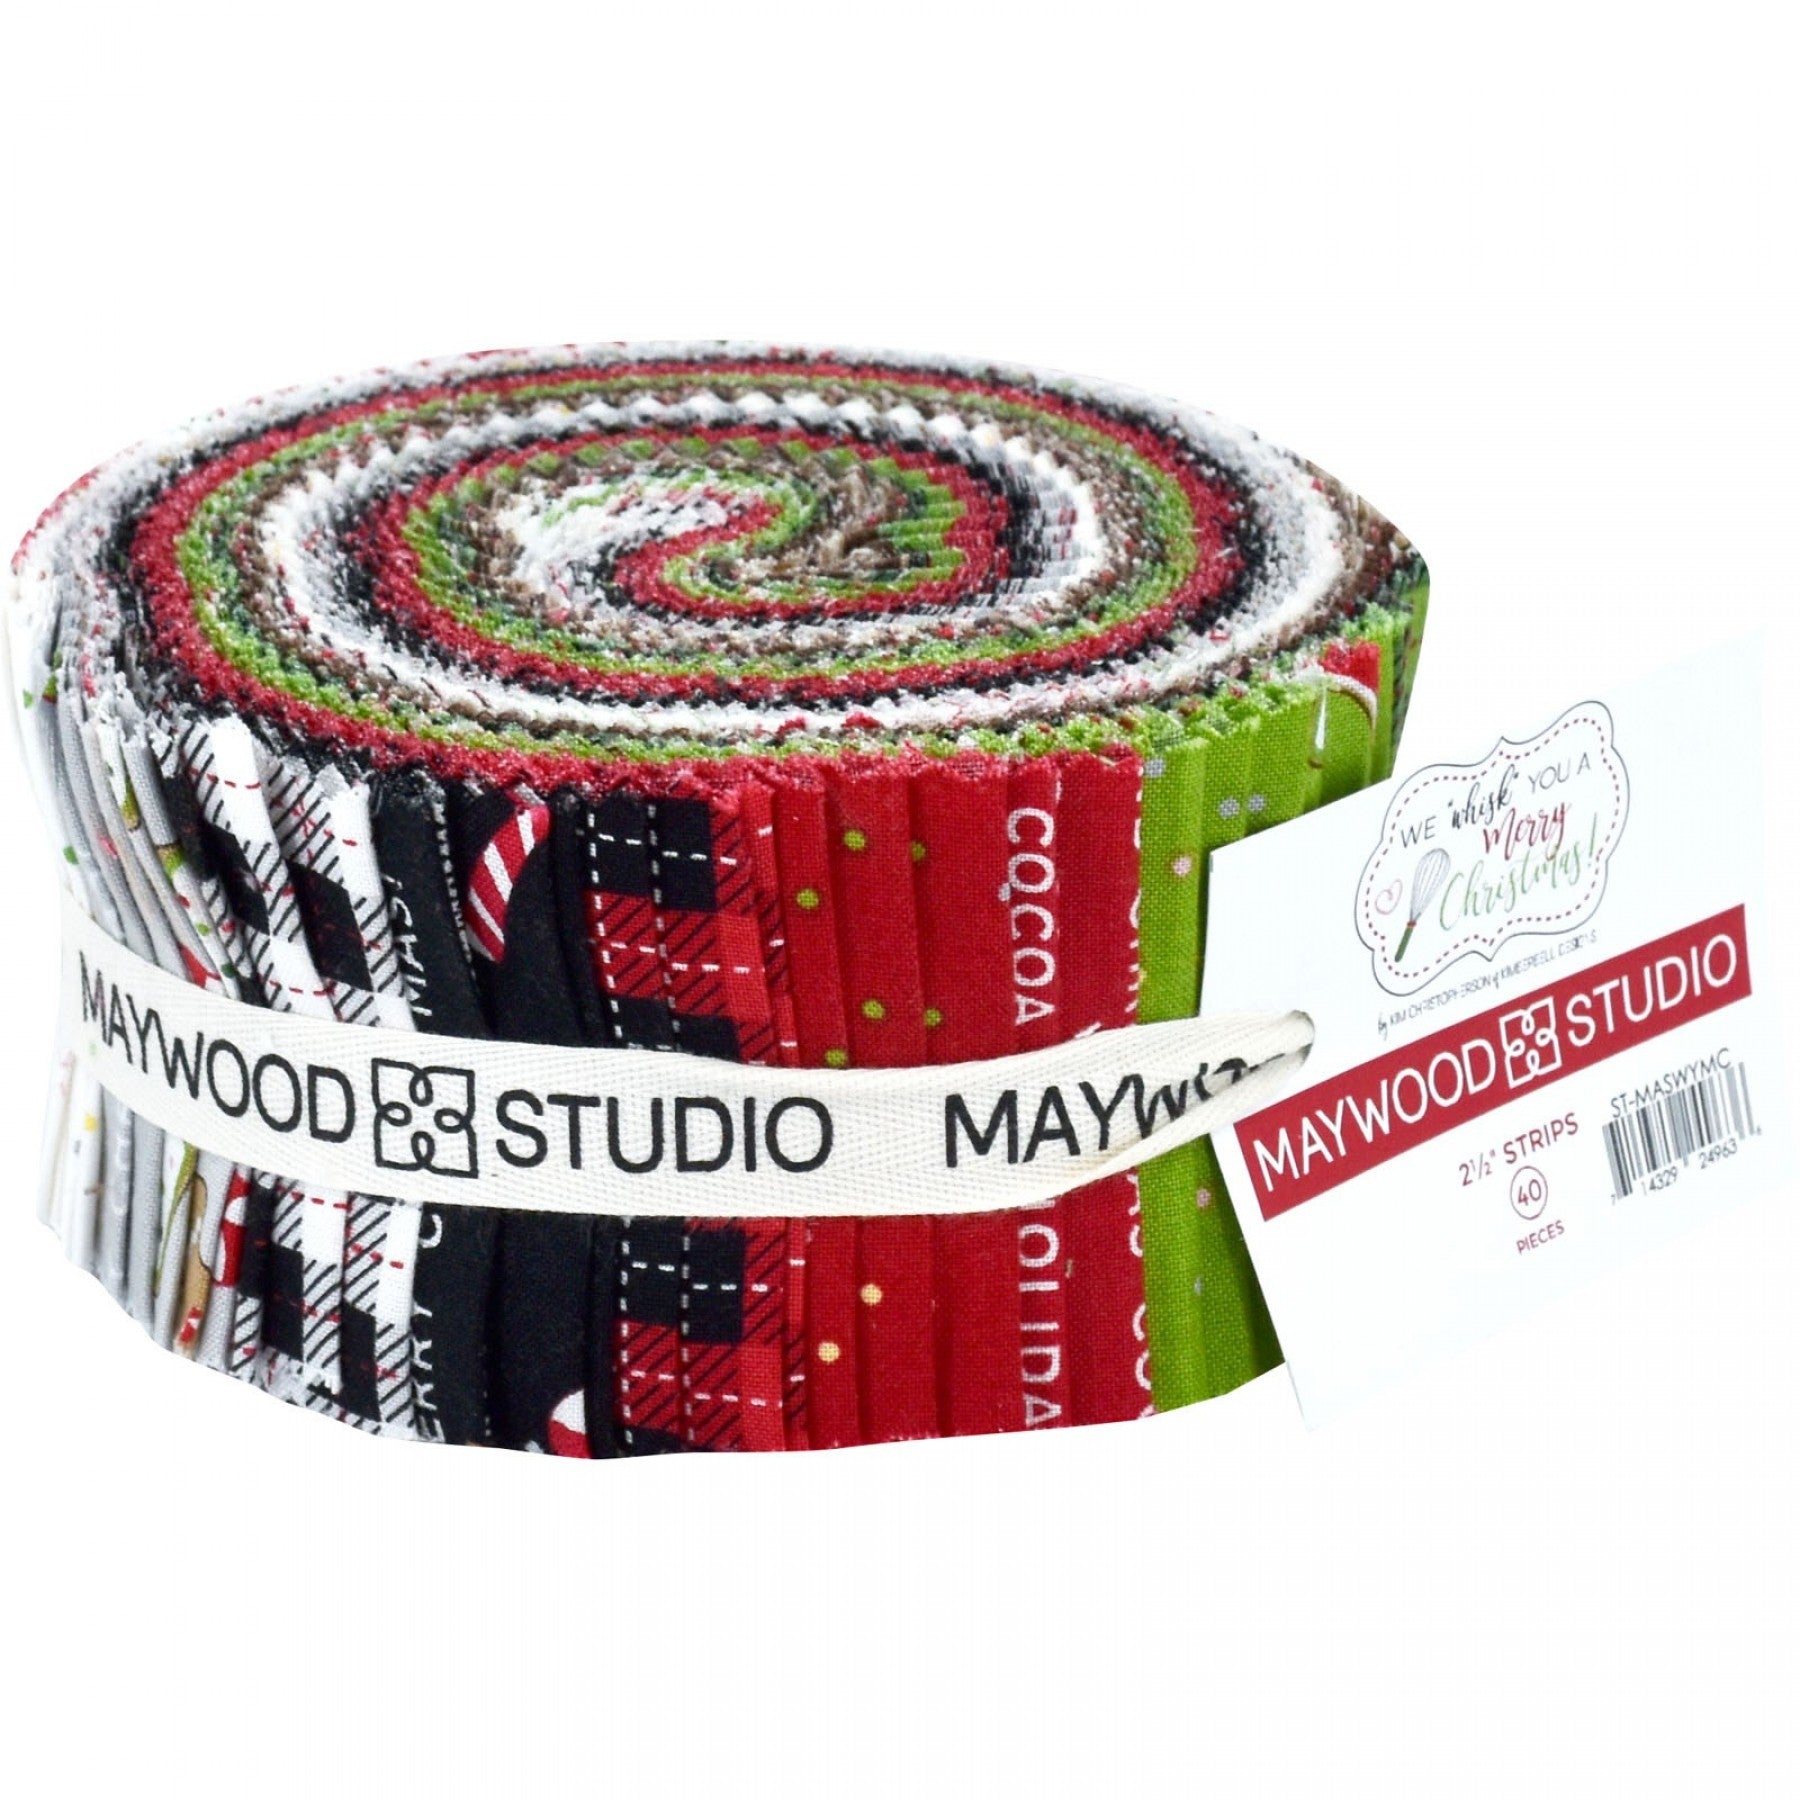 Maywood Studio - We Whisk You A Merry Christmas Roll - 40 Strips